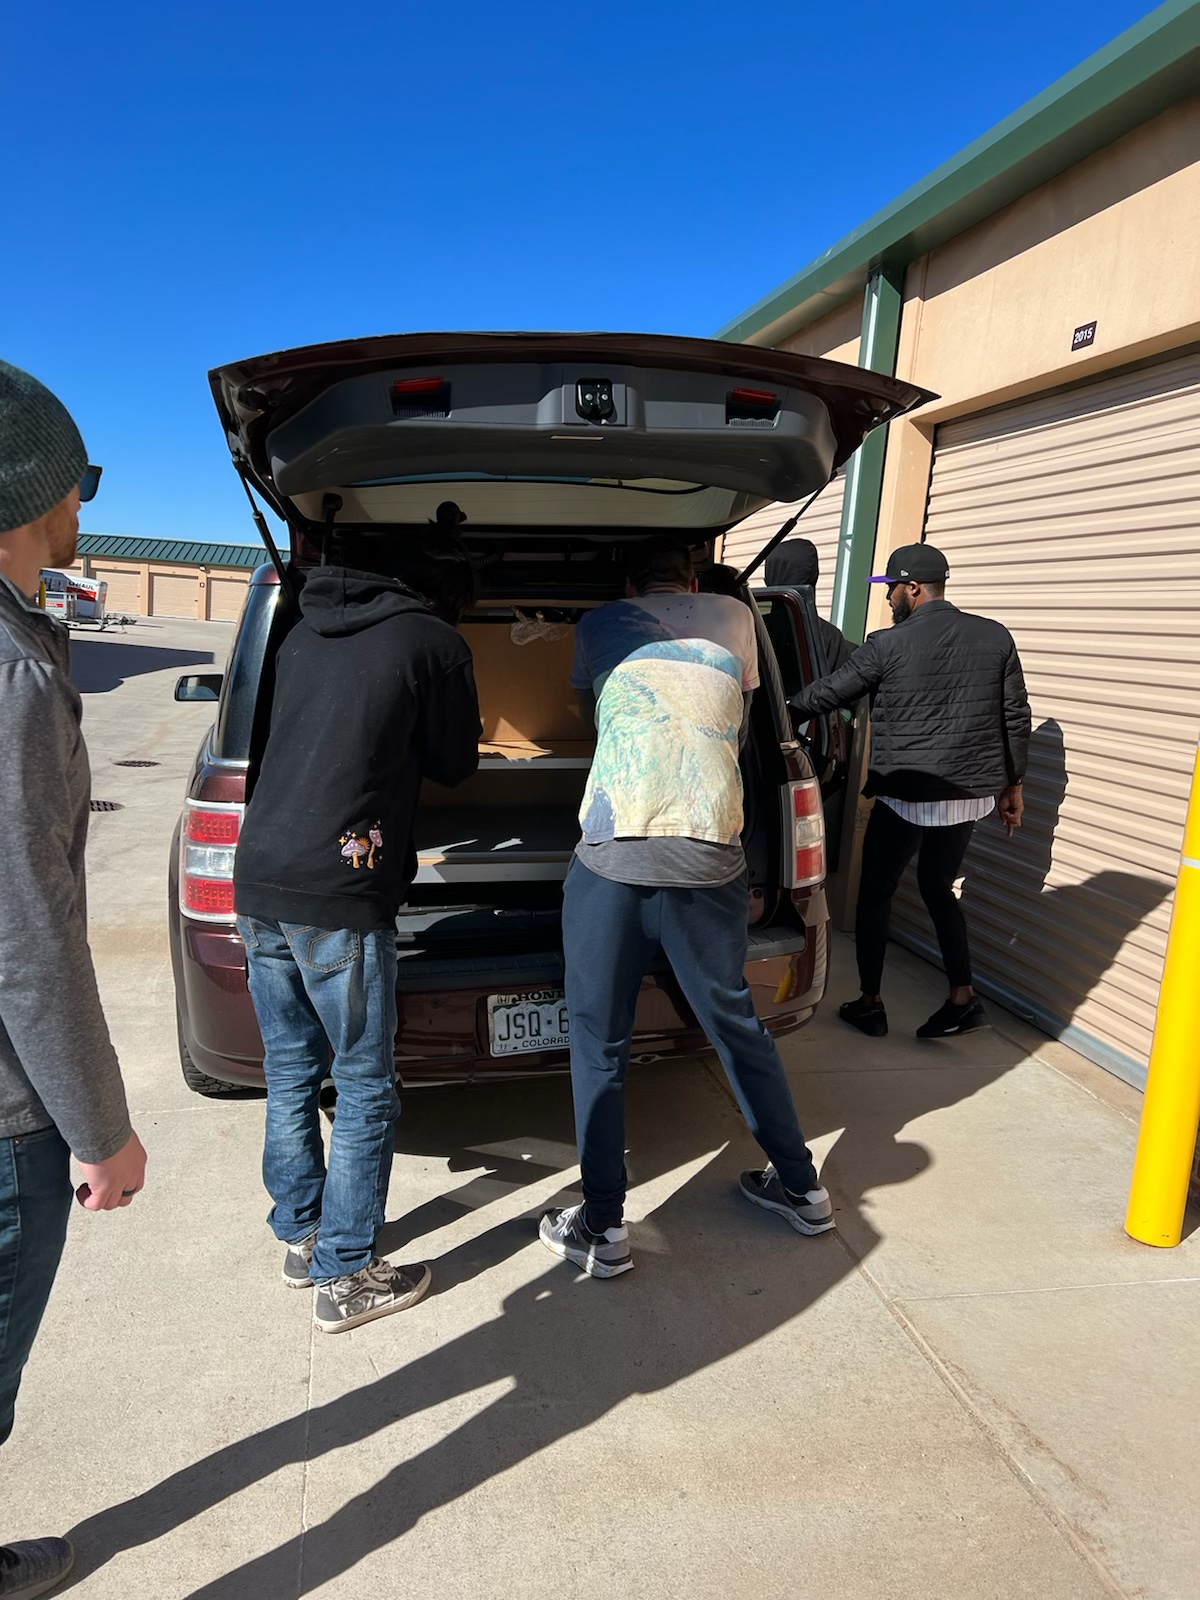 A group of people loading boxes into the back of a van.